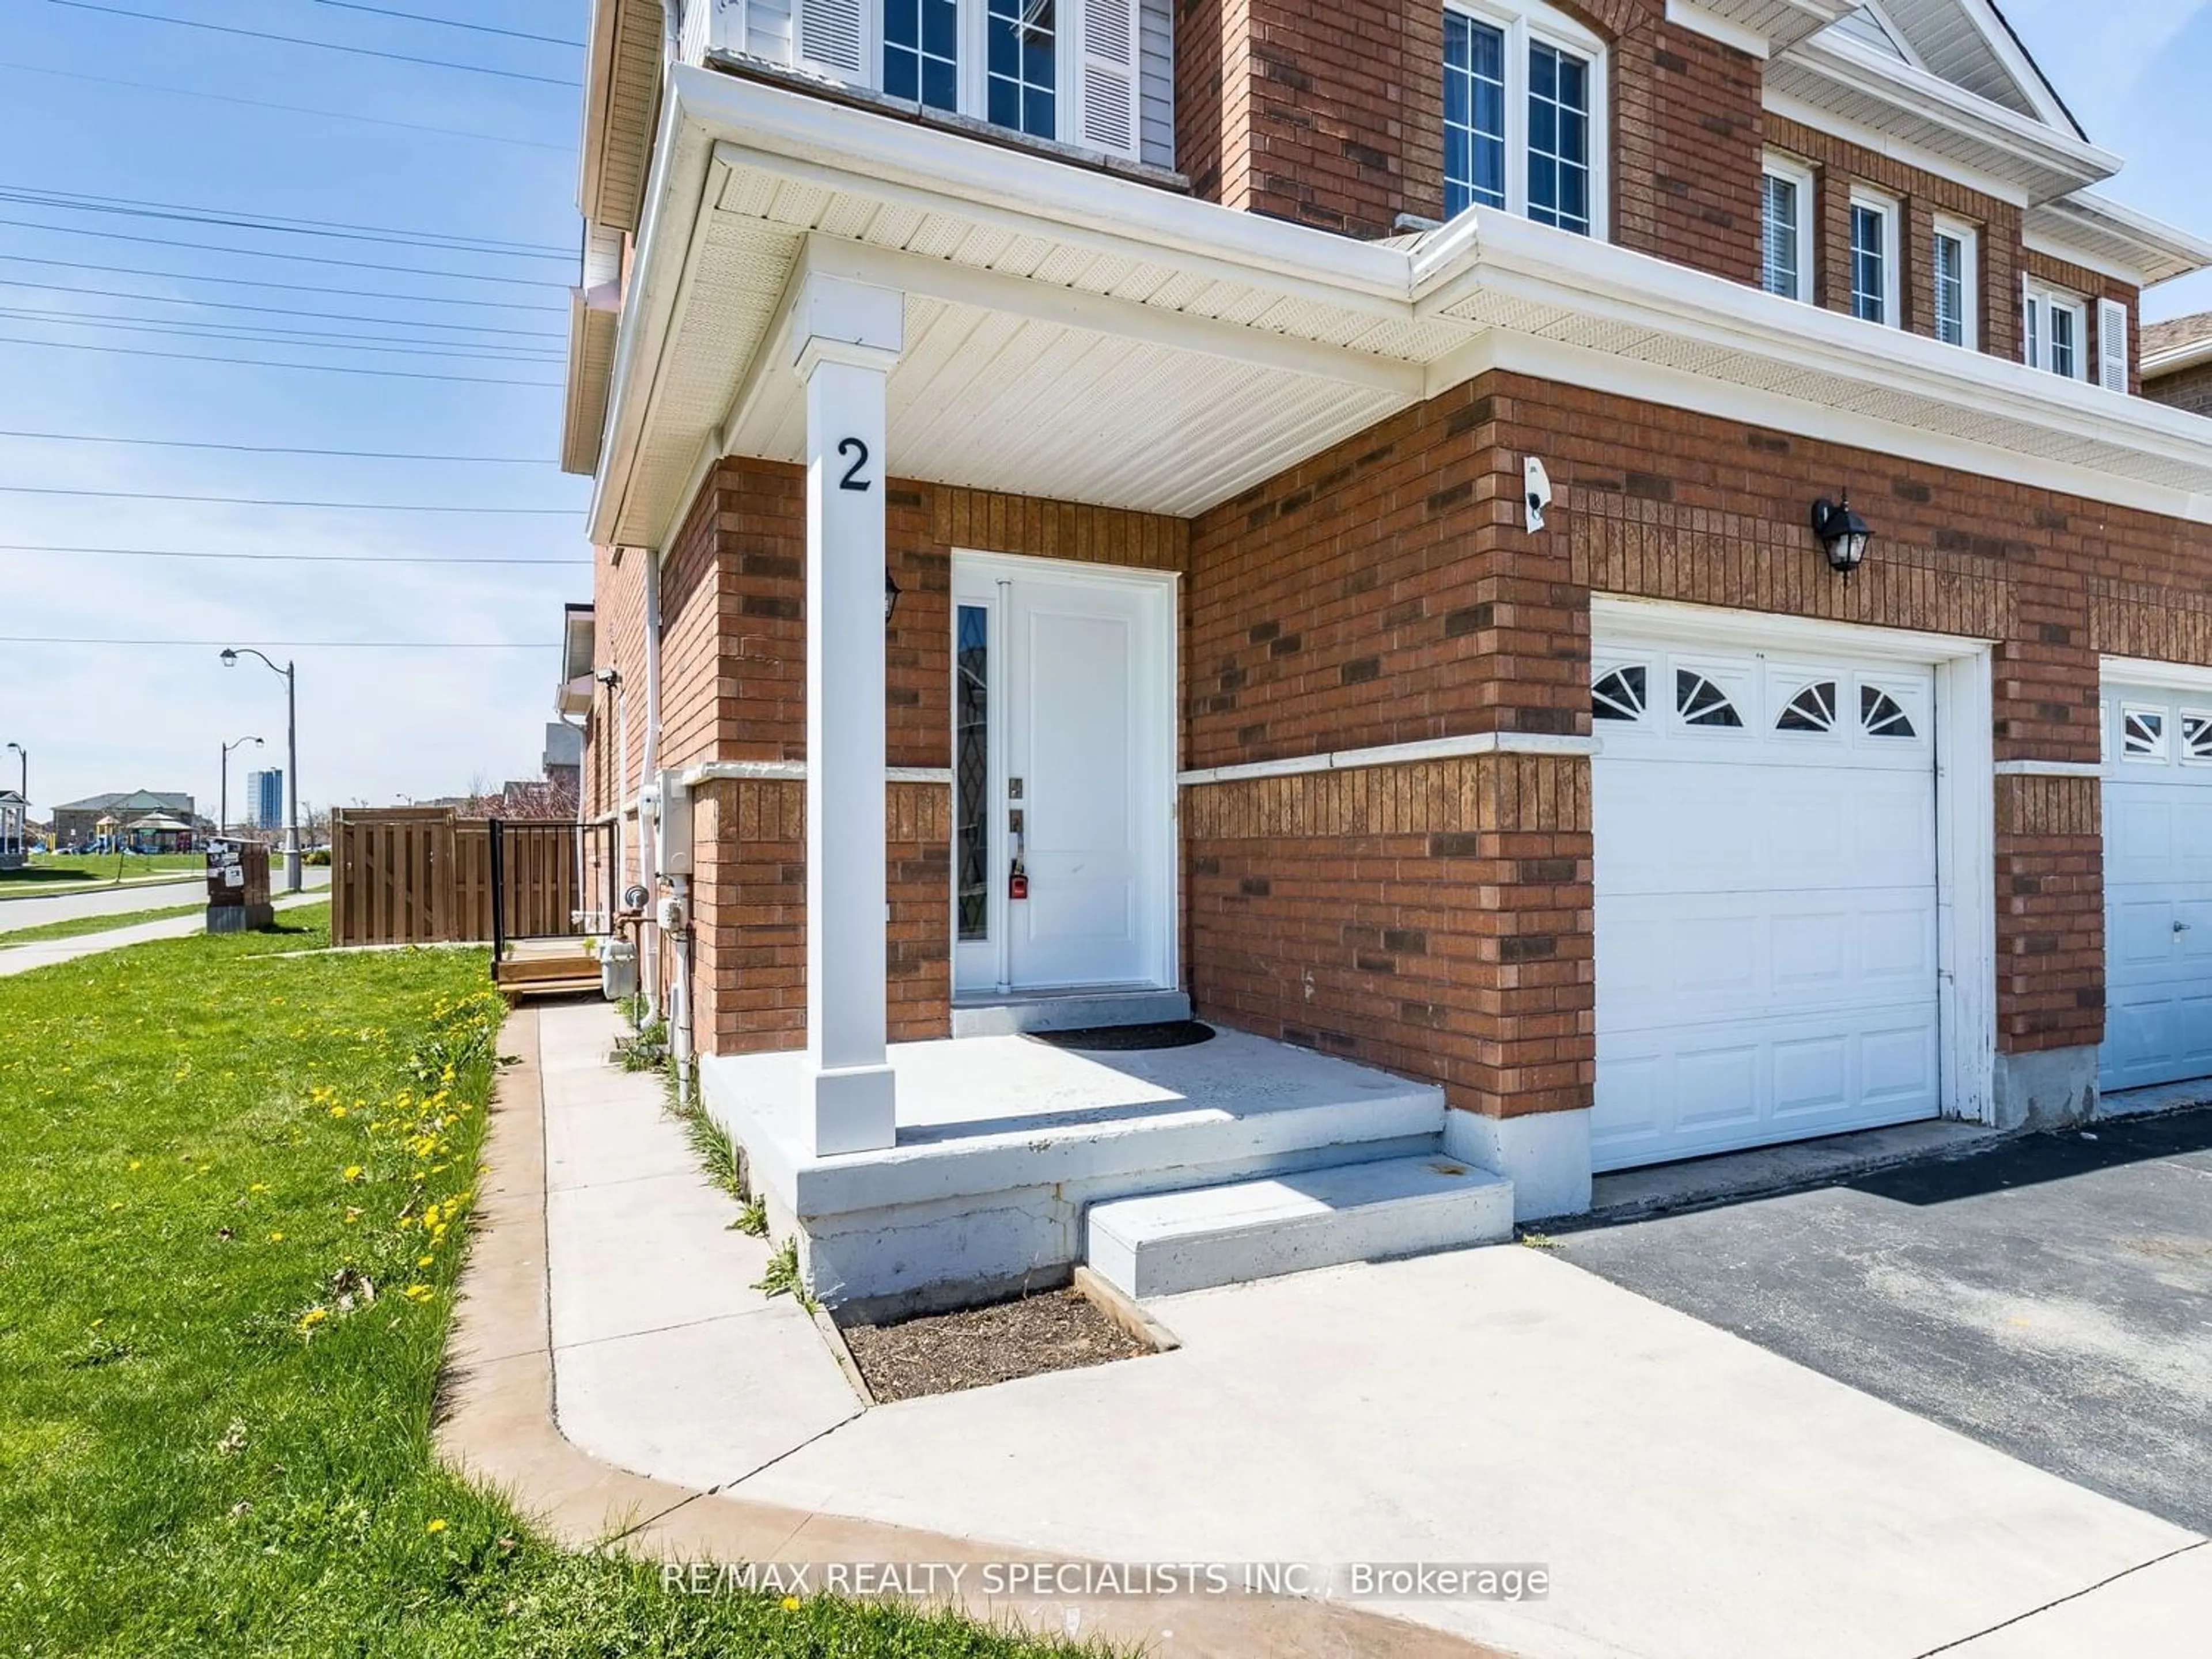 Home with brick exterior material for 2 Wicklow Rd, Brampton Ontario L6X 0J7